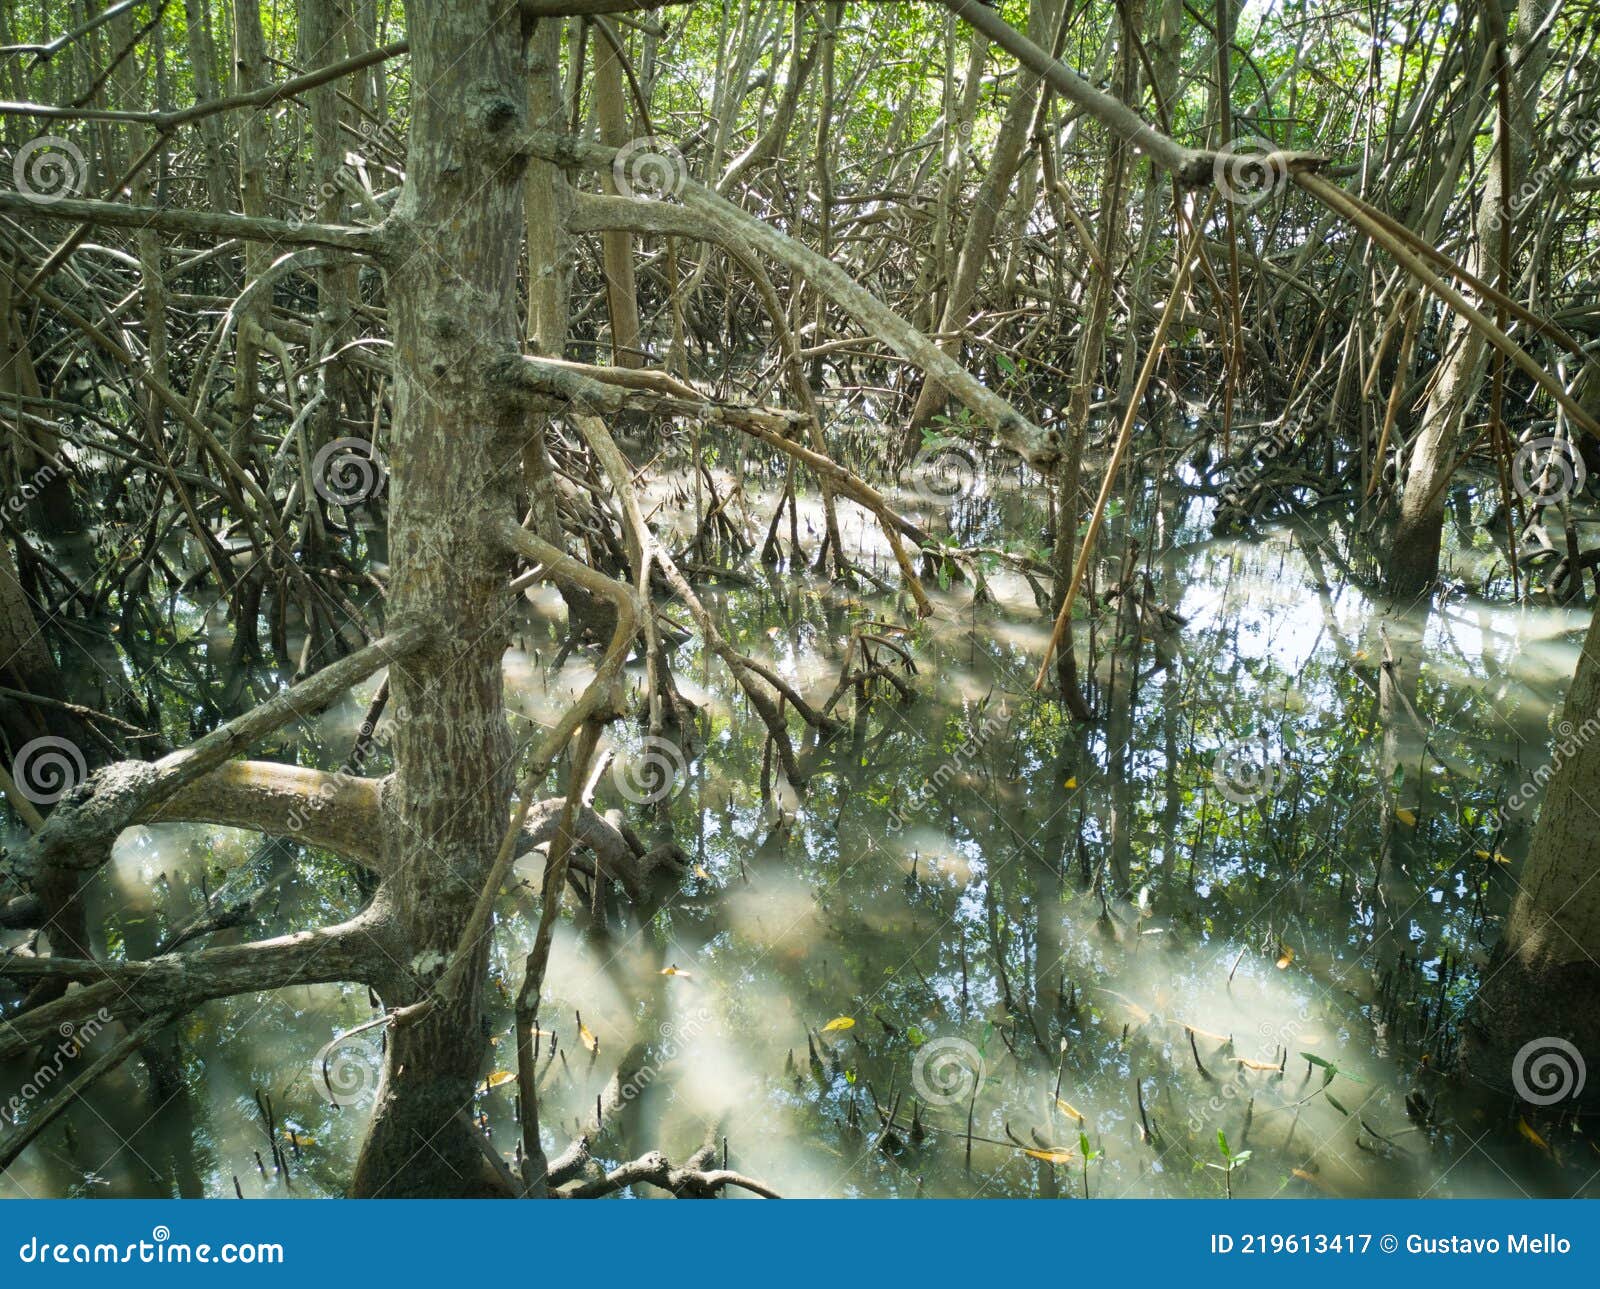 Mangrove Vegetation with Roots Stock Image Image of root, beautiful: